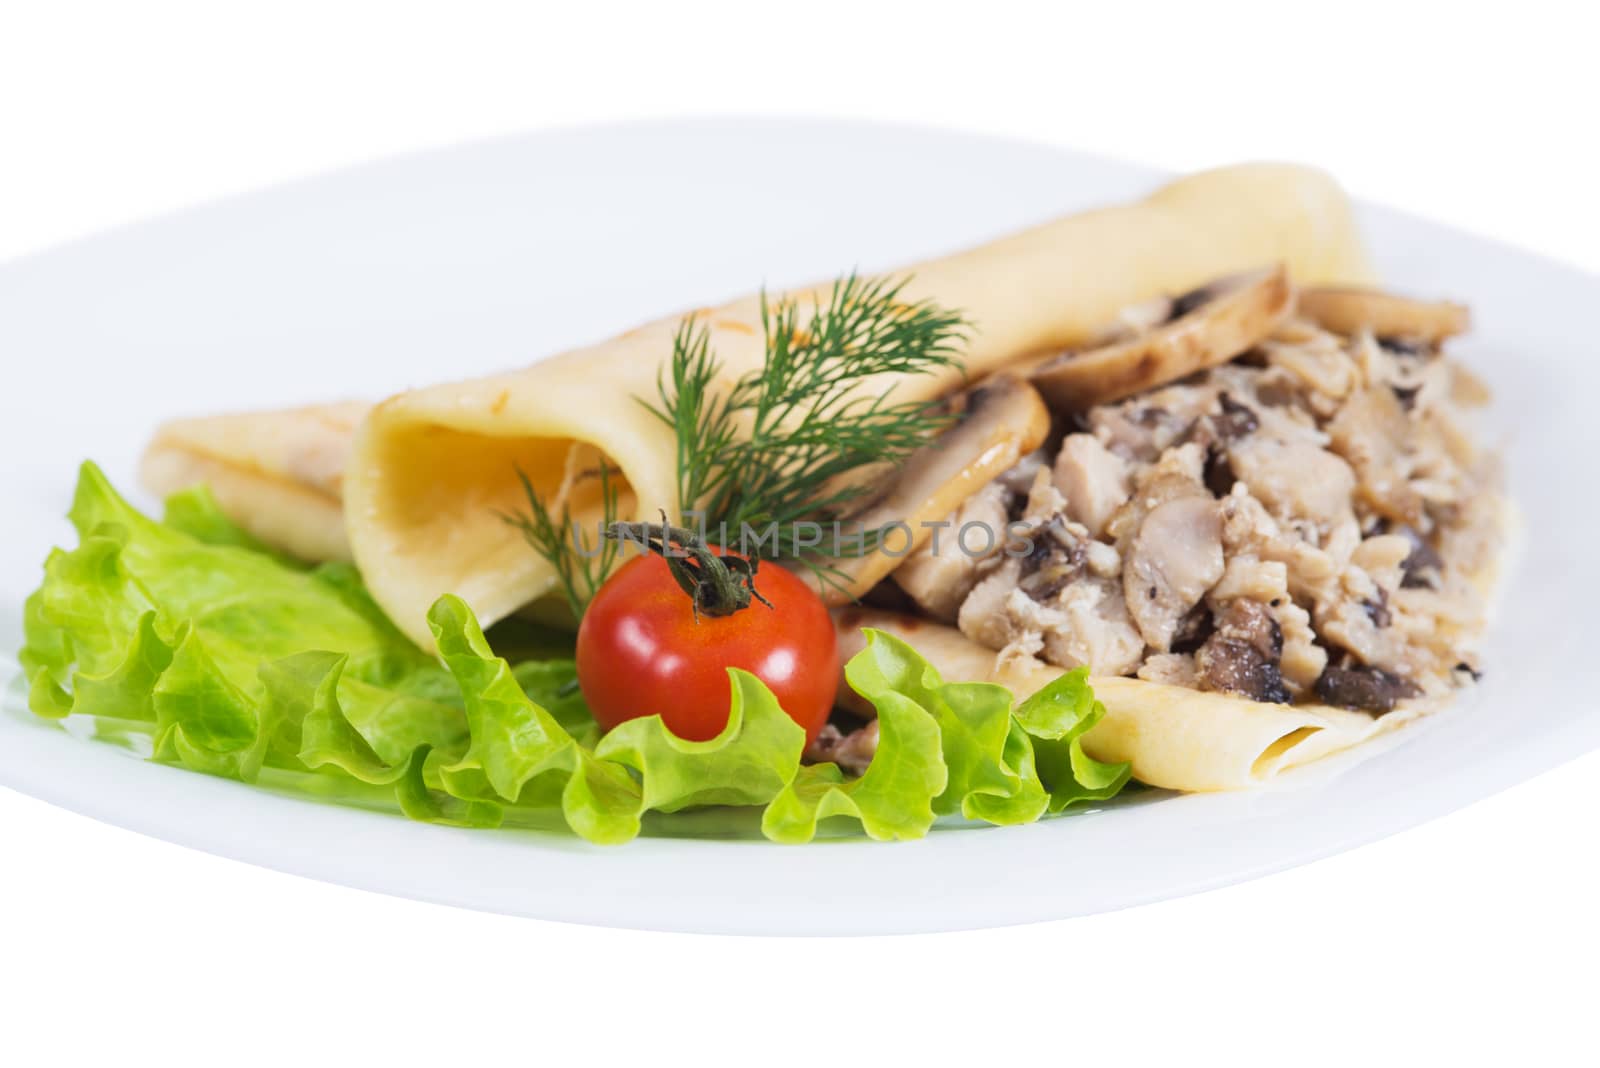 Pancakes with meat and mushrooms on plate by kzen